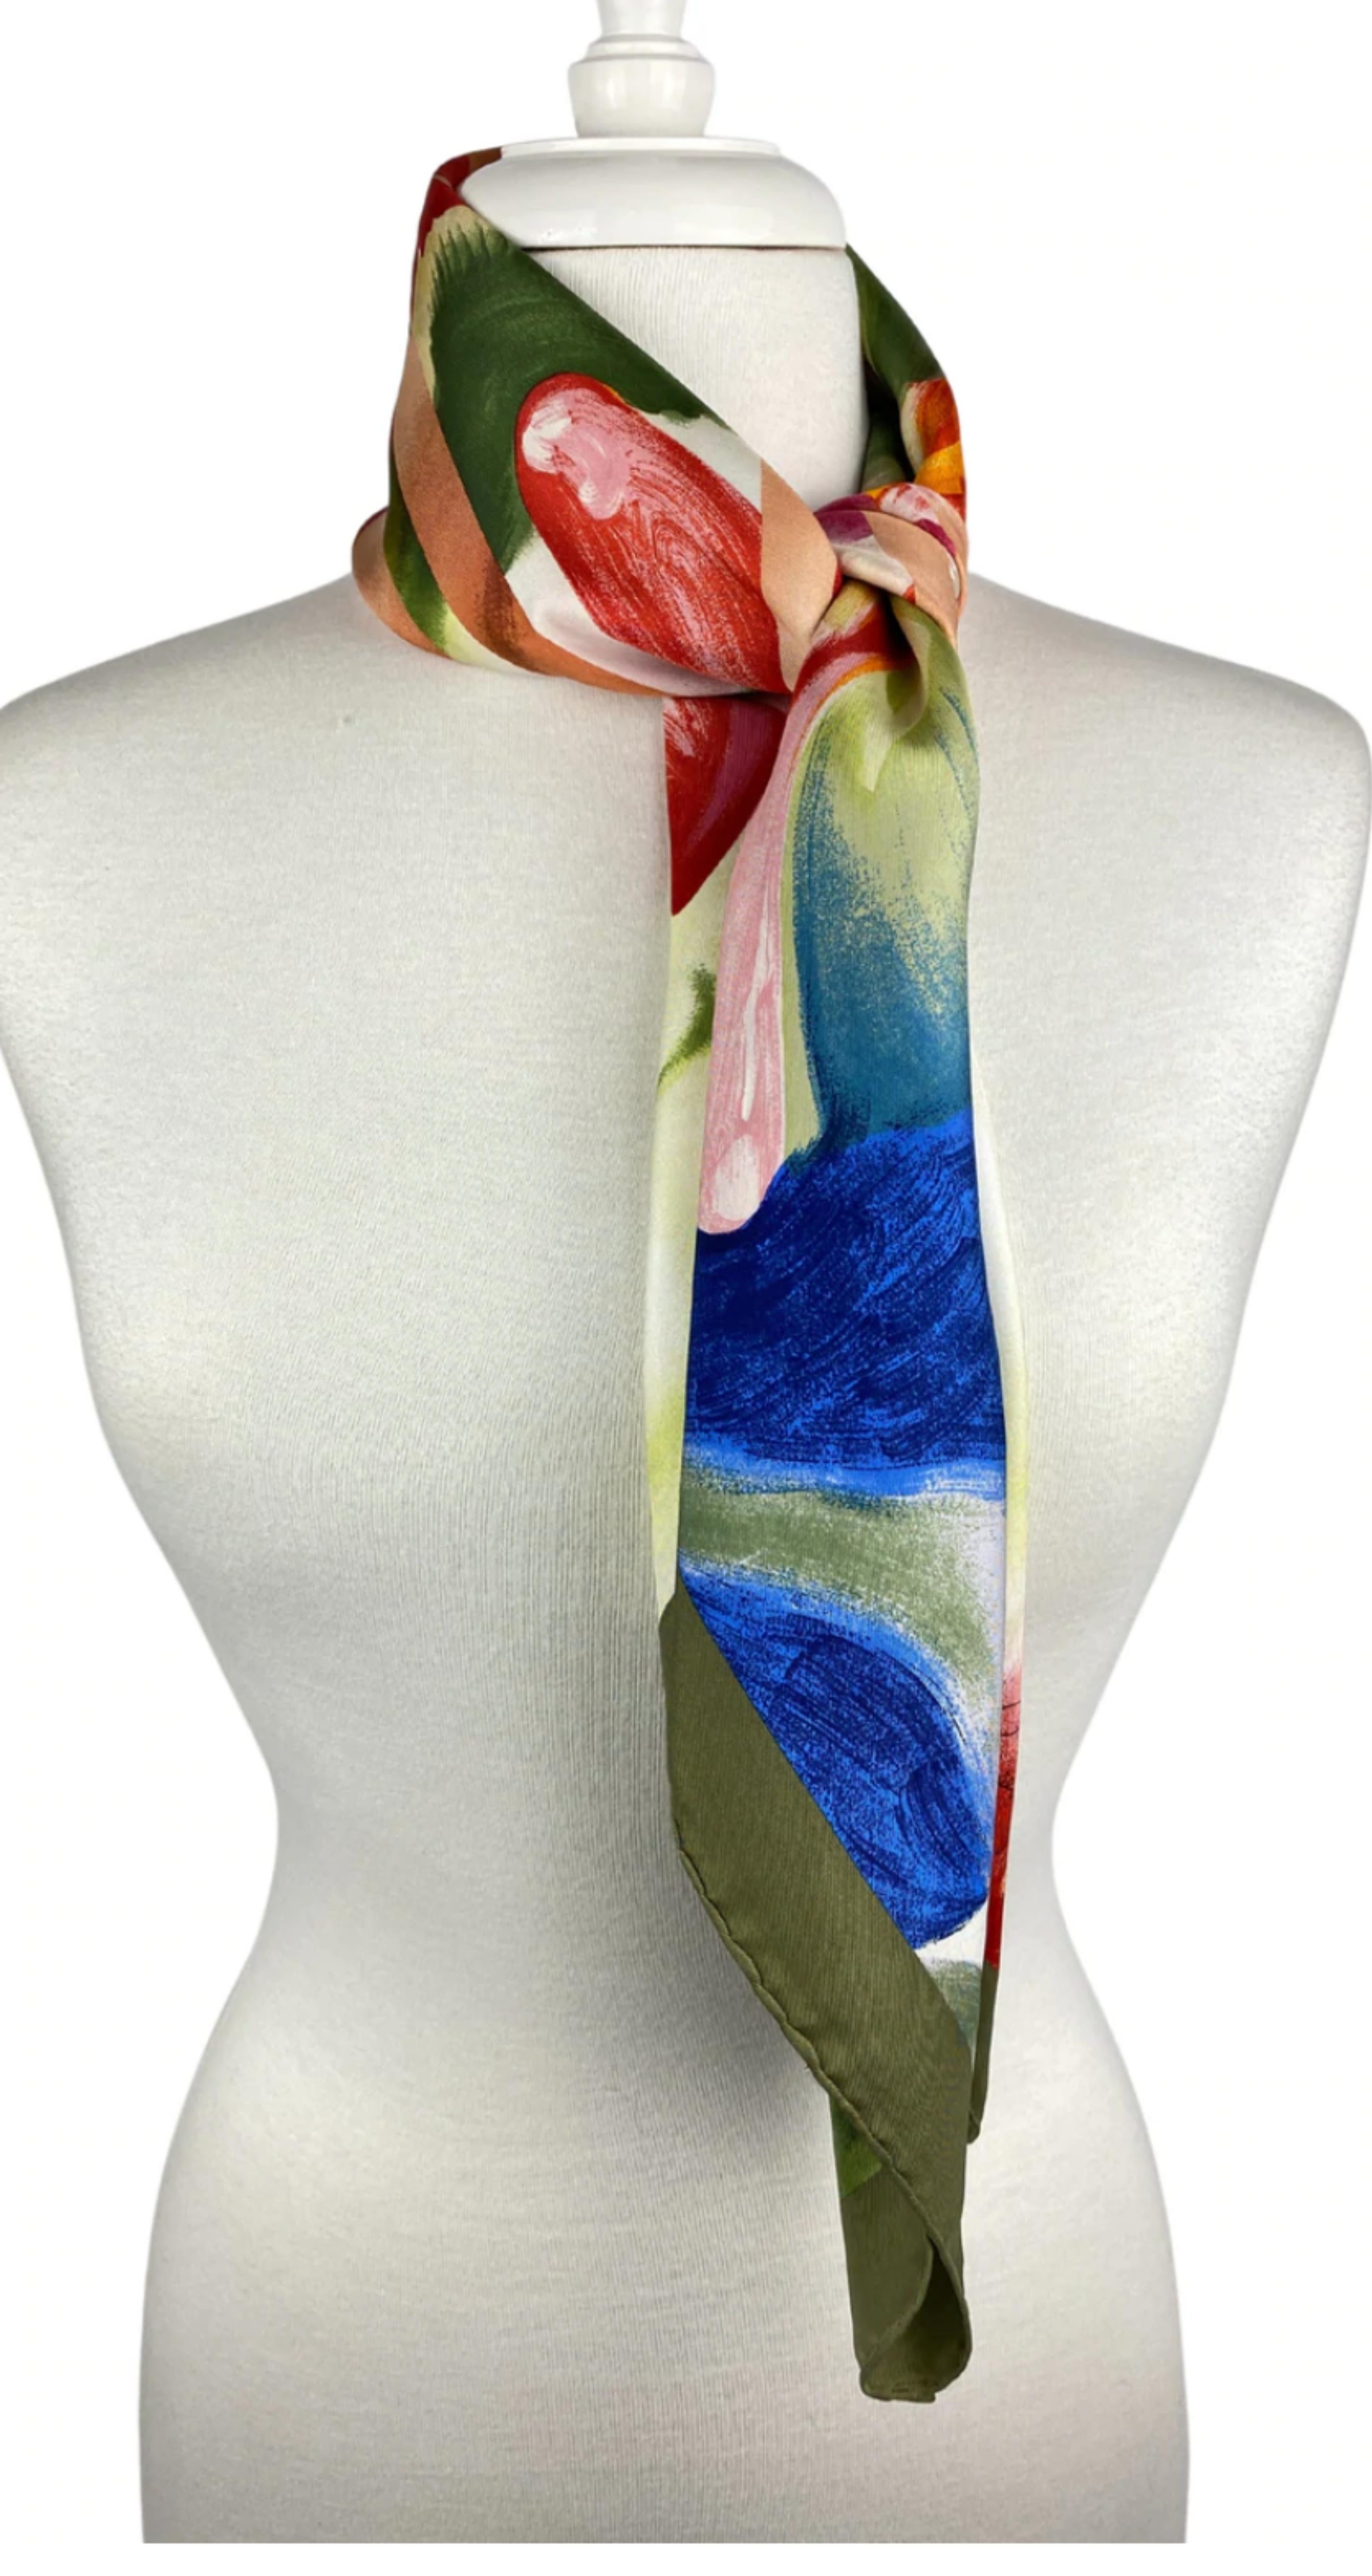  Louis Vuitton Limited Edition Silk Scarf designed by James Rosenquist For Sale 3